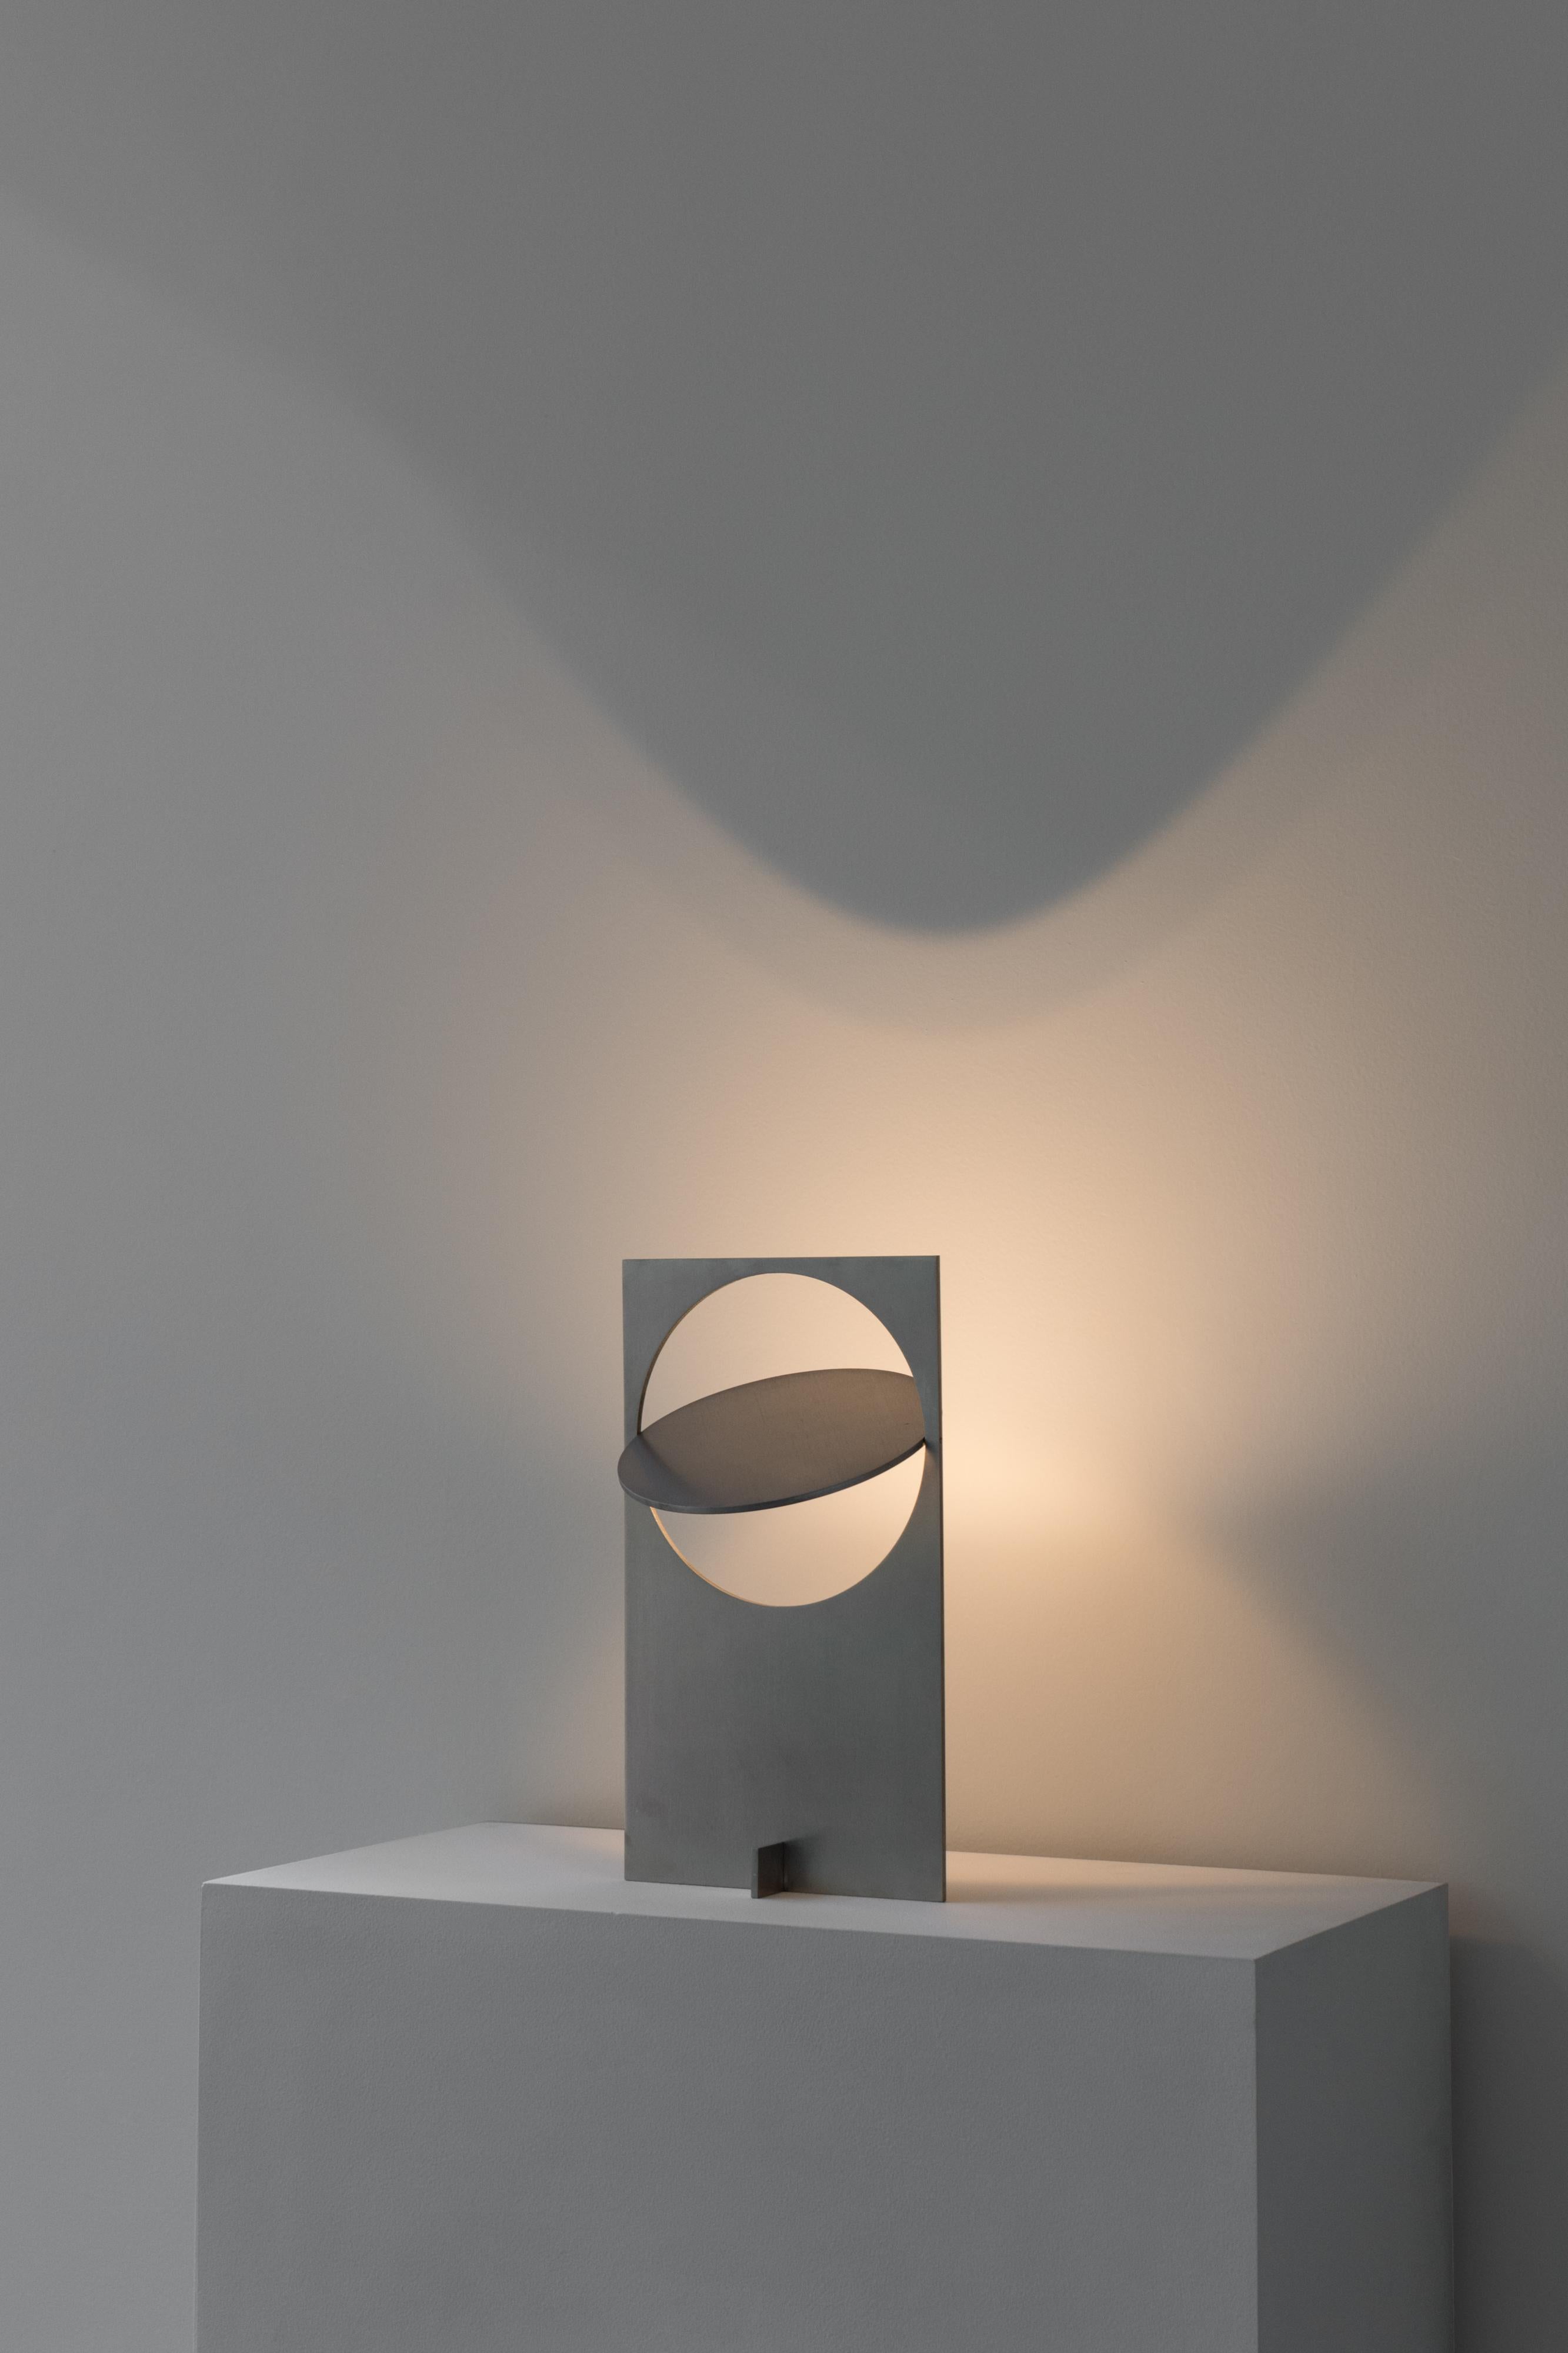 OBJ-01 stainless steel table lamp by Manu Bano
Dimensions: H 38 x W 22 x D 7 cm
Material: stainless steel

All lamps are wired for the US, but voltage converter is available for other countries. 

OBJ-01 is an understandable simple gesture, an